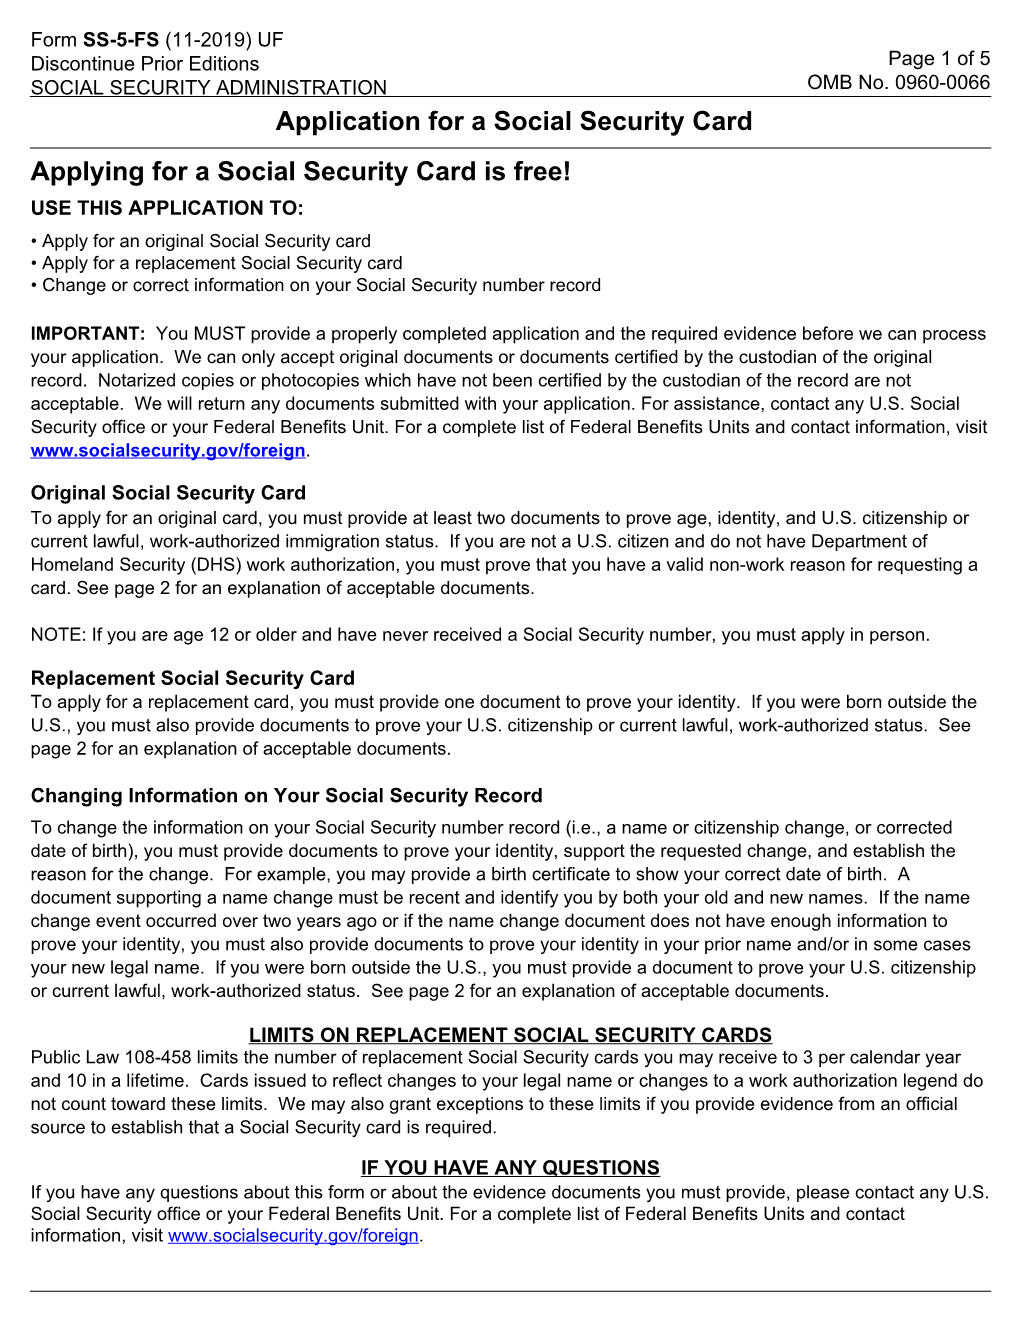 Application for the Social Security Card